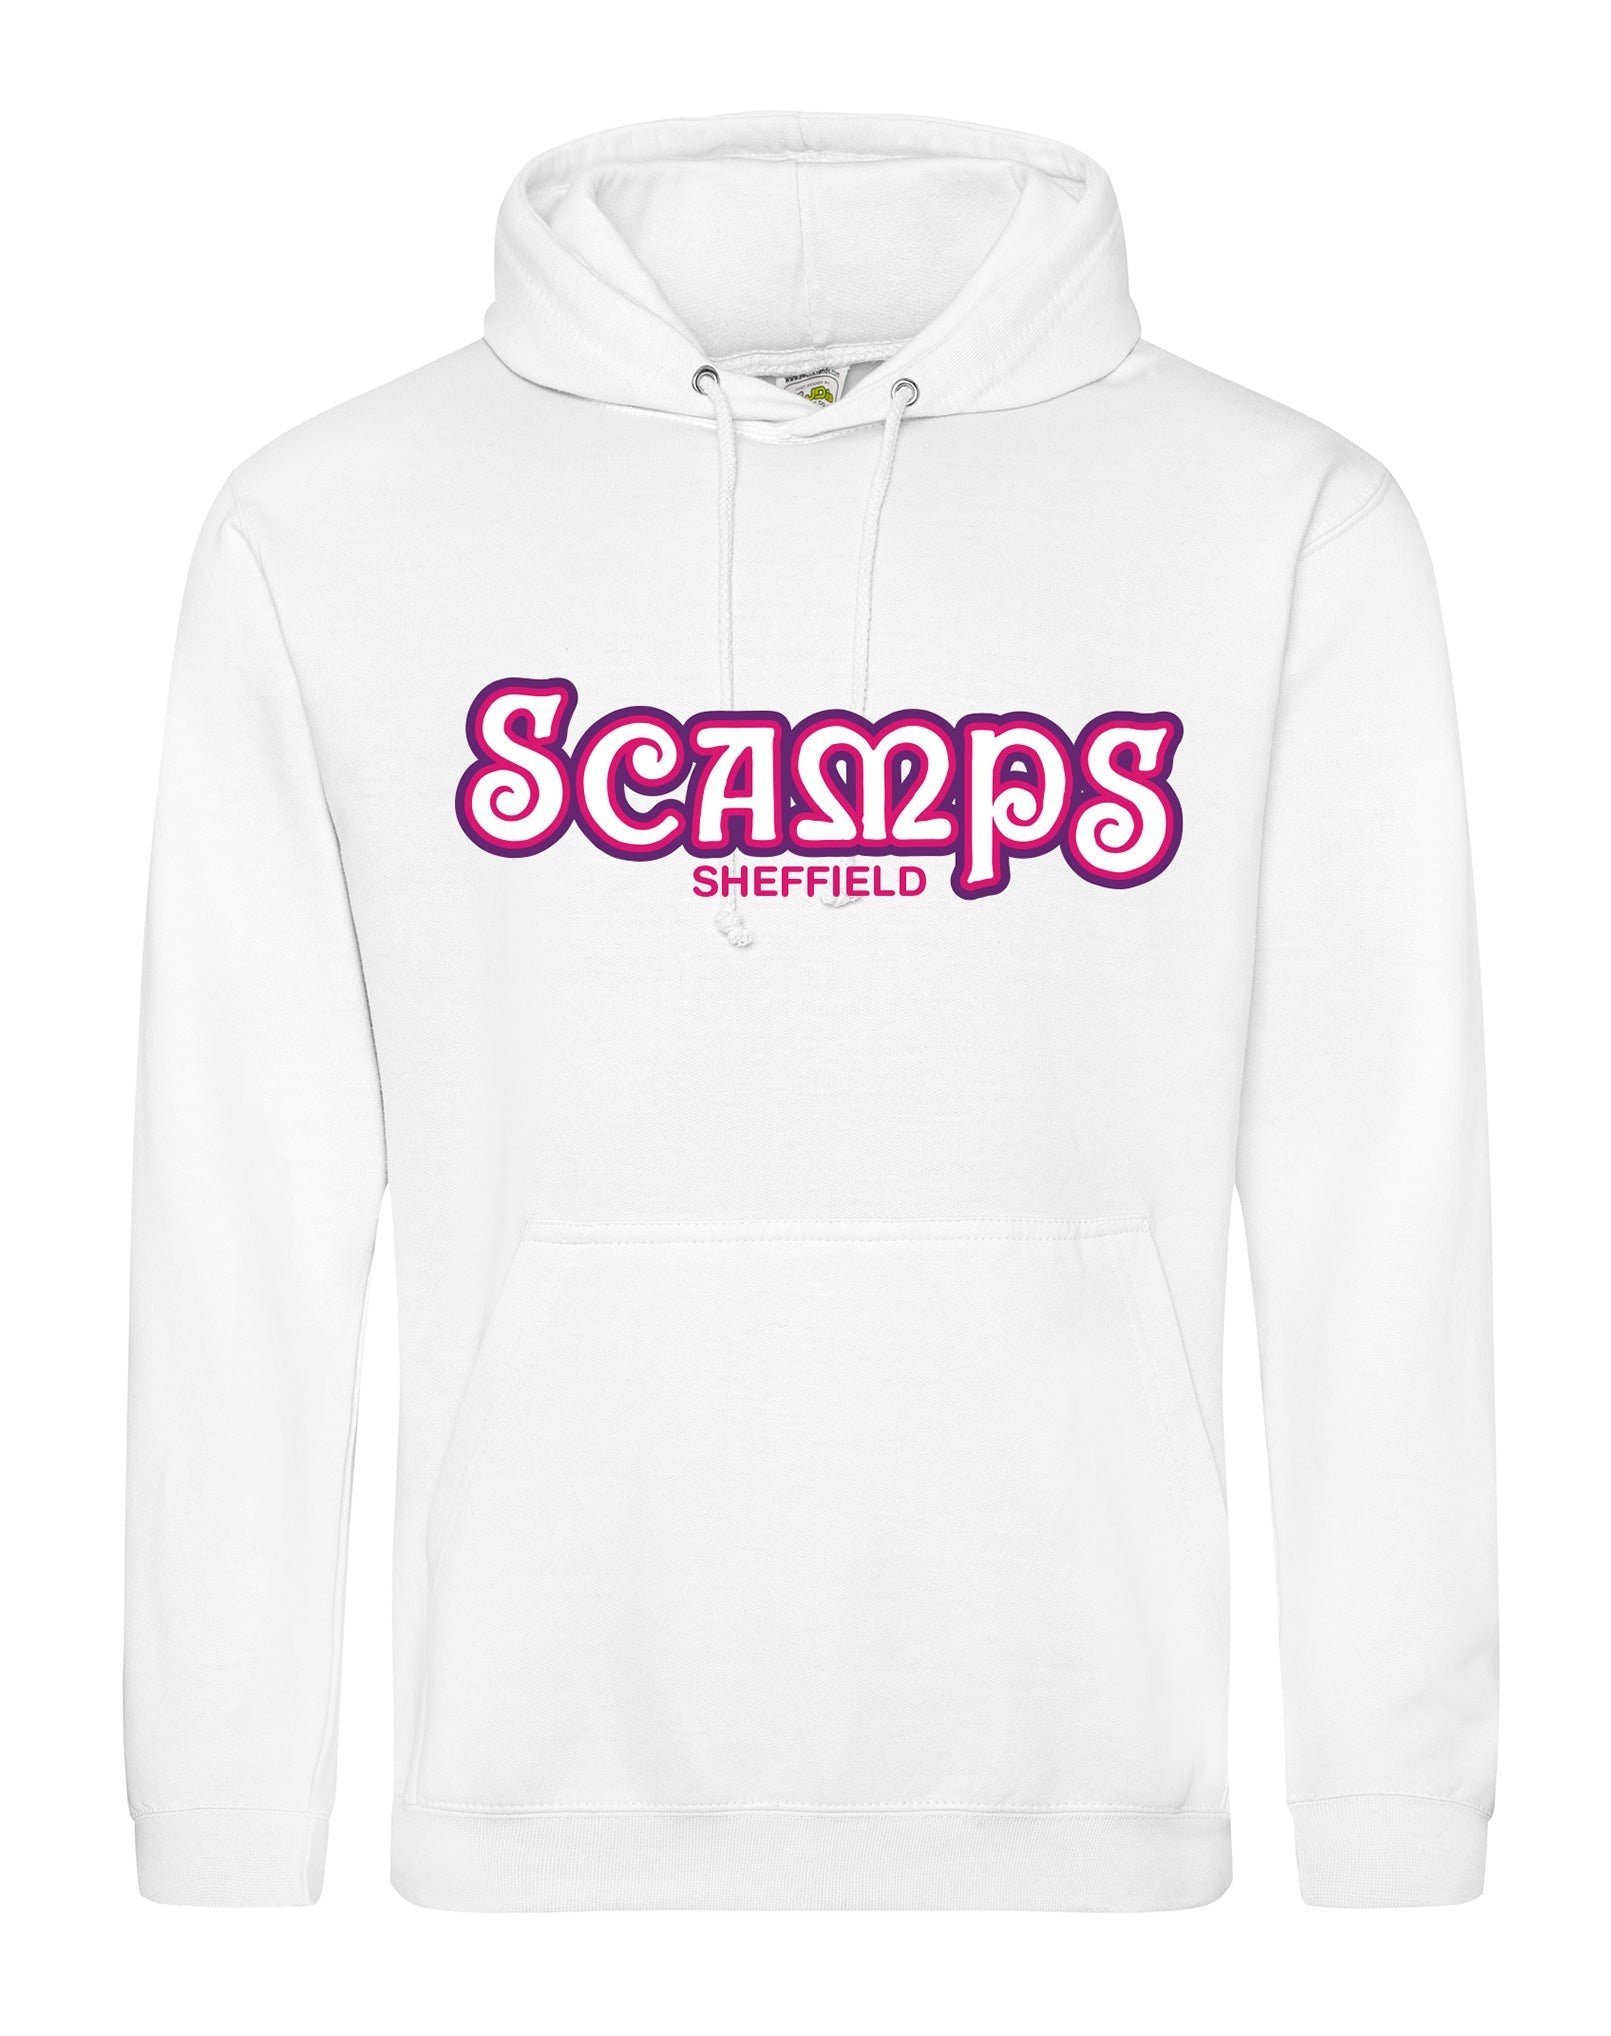 Scamps unisex fit hoodie - various colours - Dirty Stop Outs